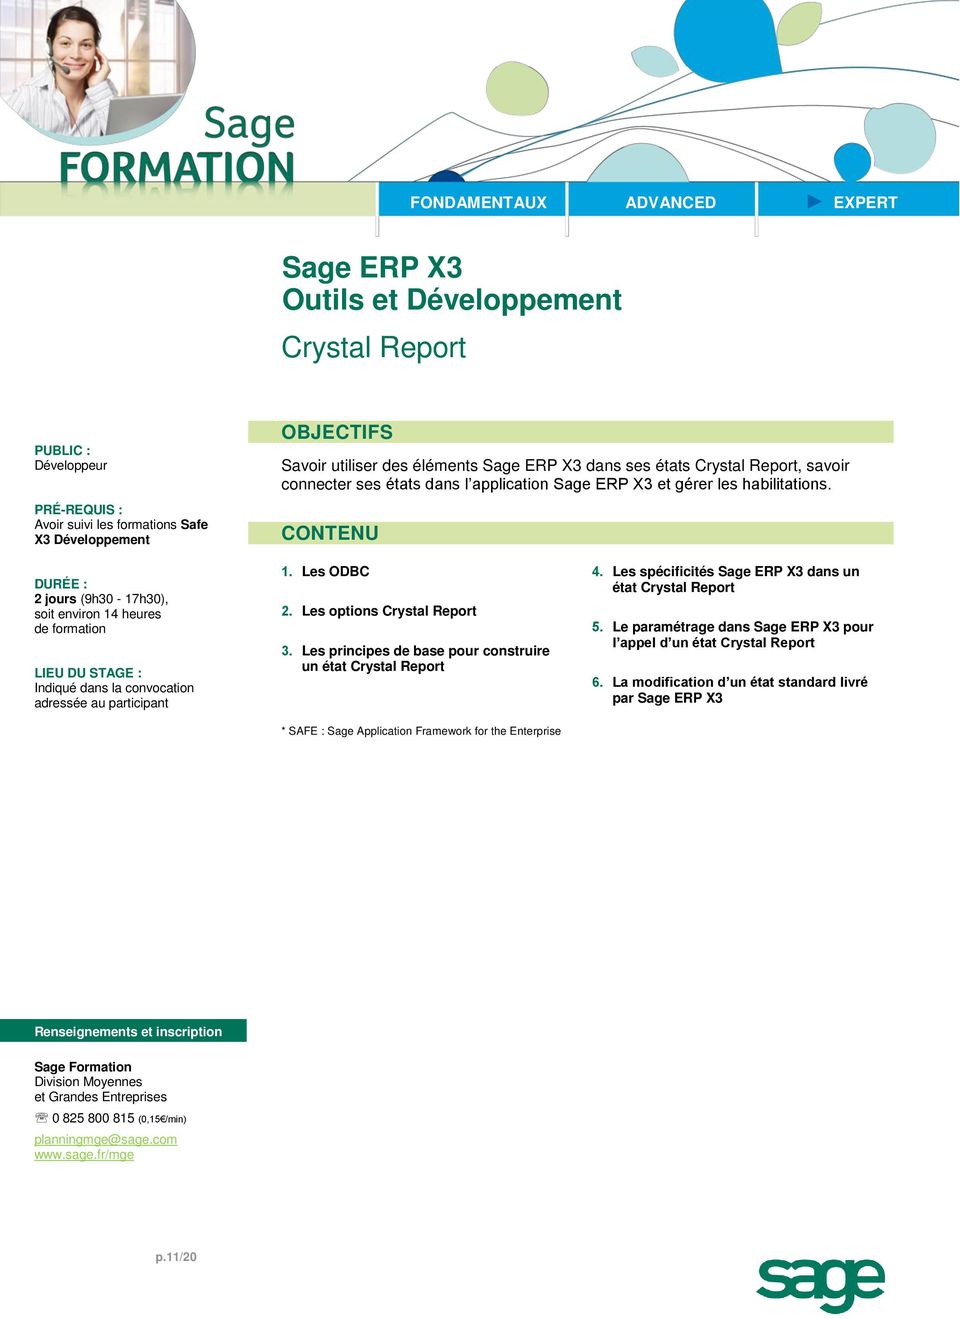 Les options Crystal Report 3.